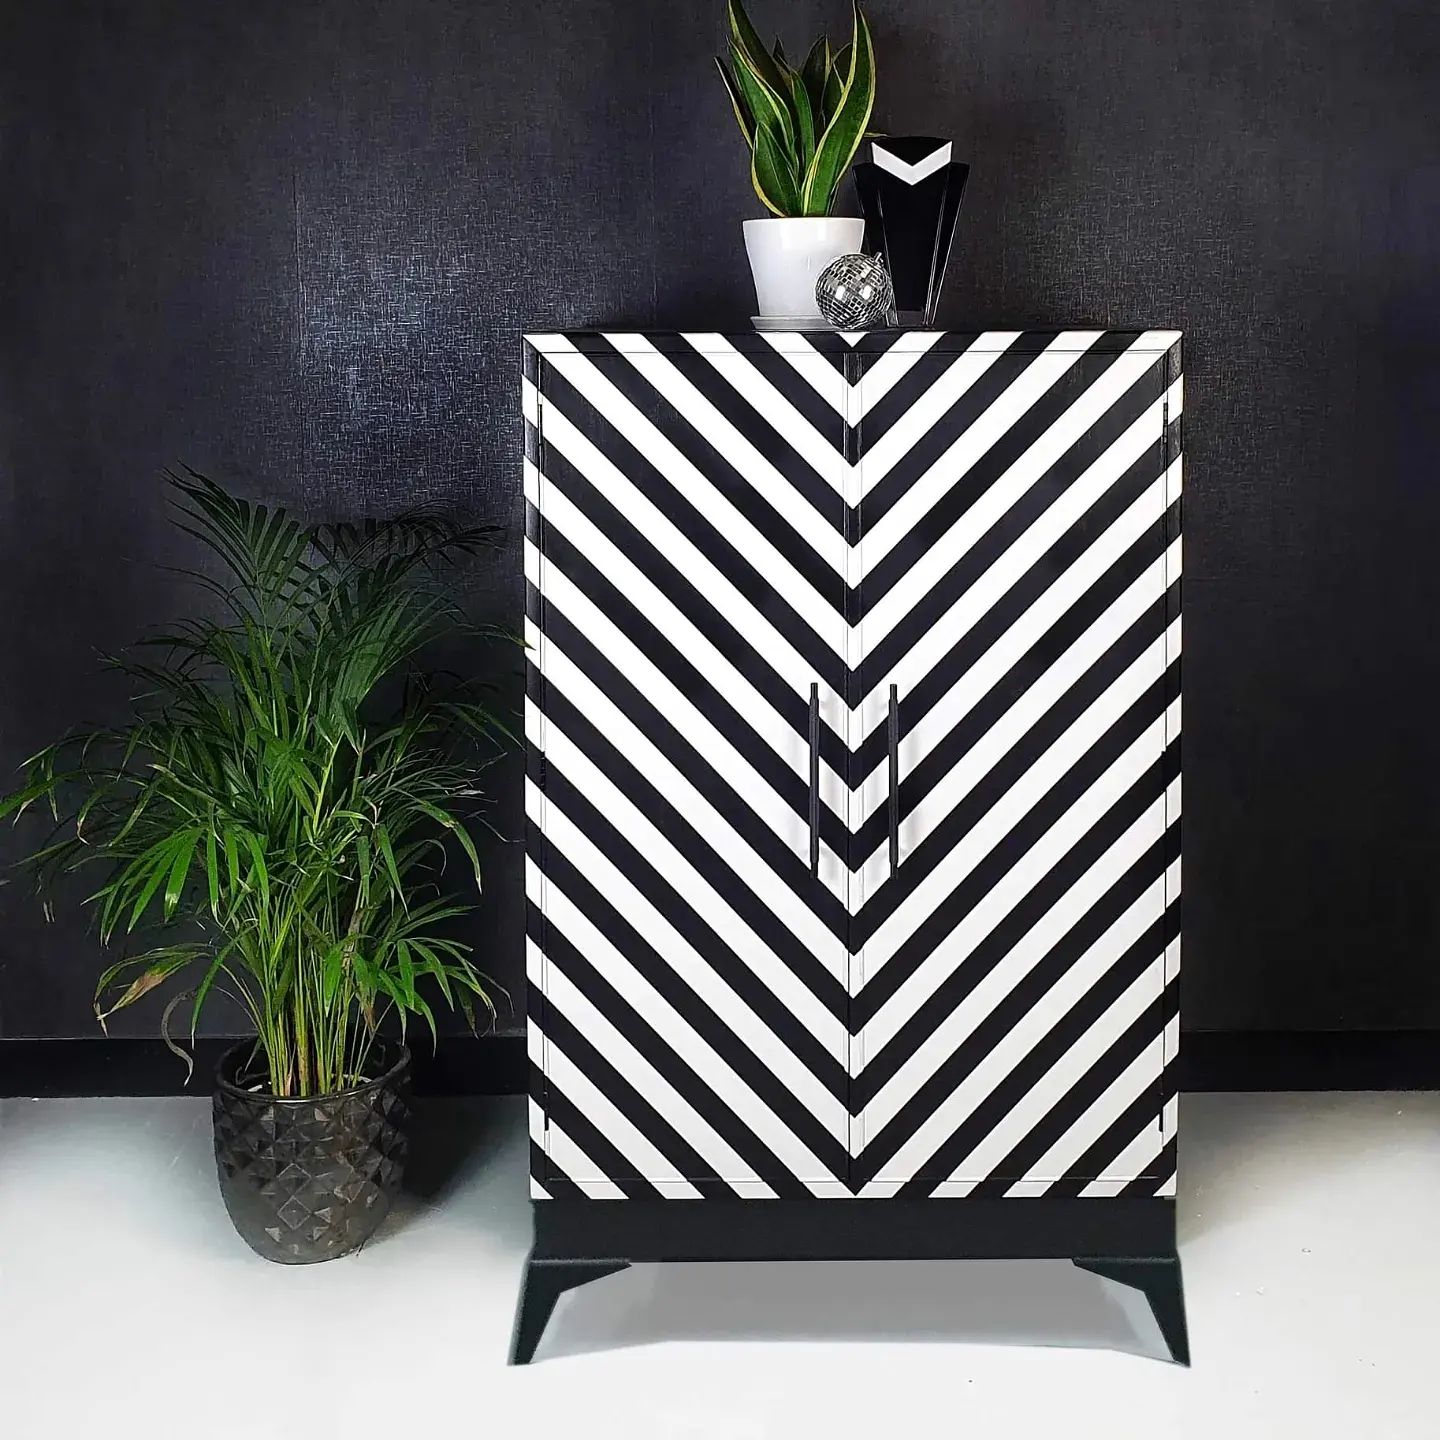 Monochrome Chevron Strip Upcycled Cabinet from Done Up North